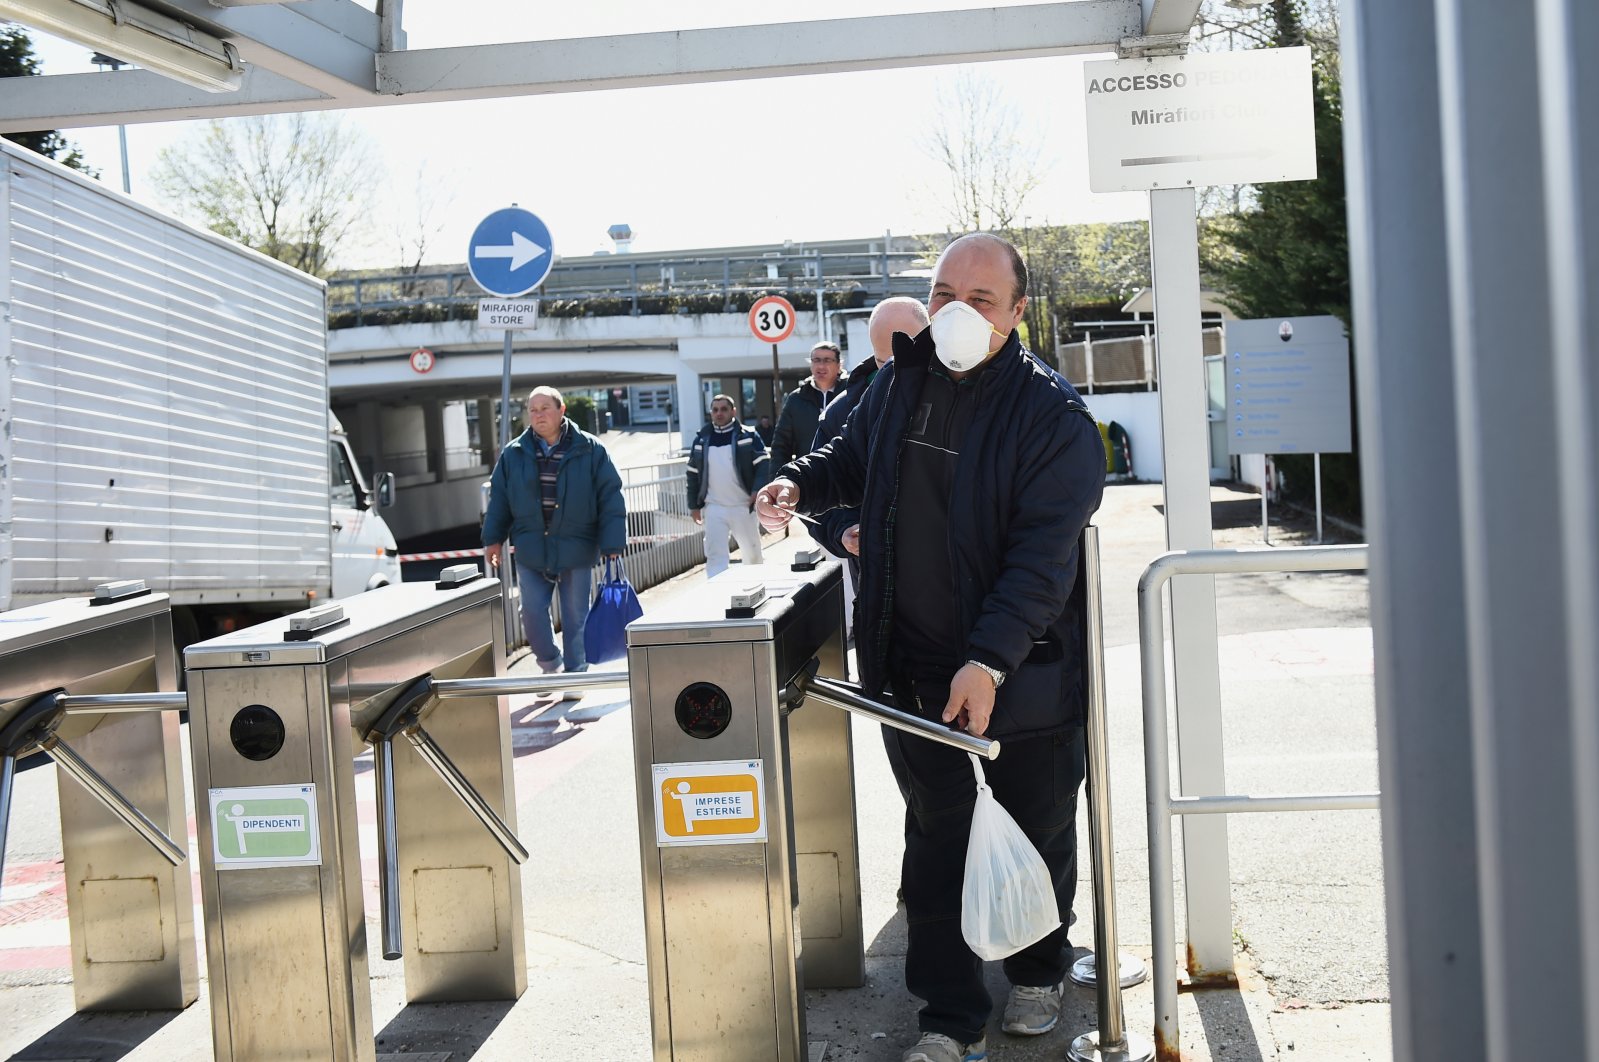 Fiat Chrysler Automobiles worker, wearing a protective face mask, leaves a Mirafiori plant, Turin, Italy, Tuesday, March 10, 2020. (Reuters Photo)